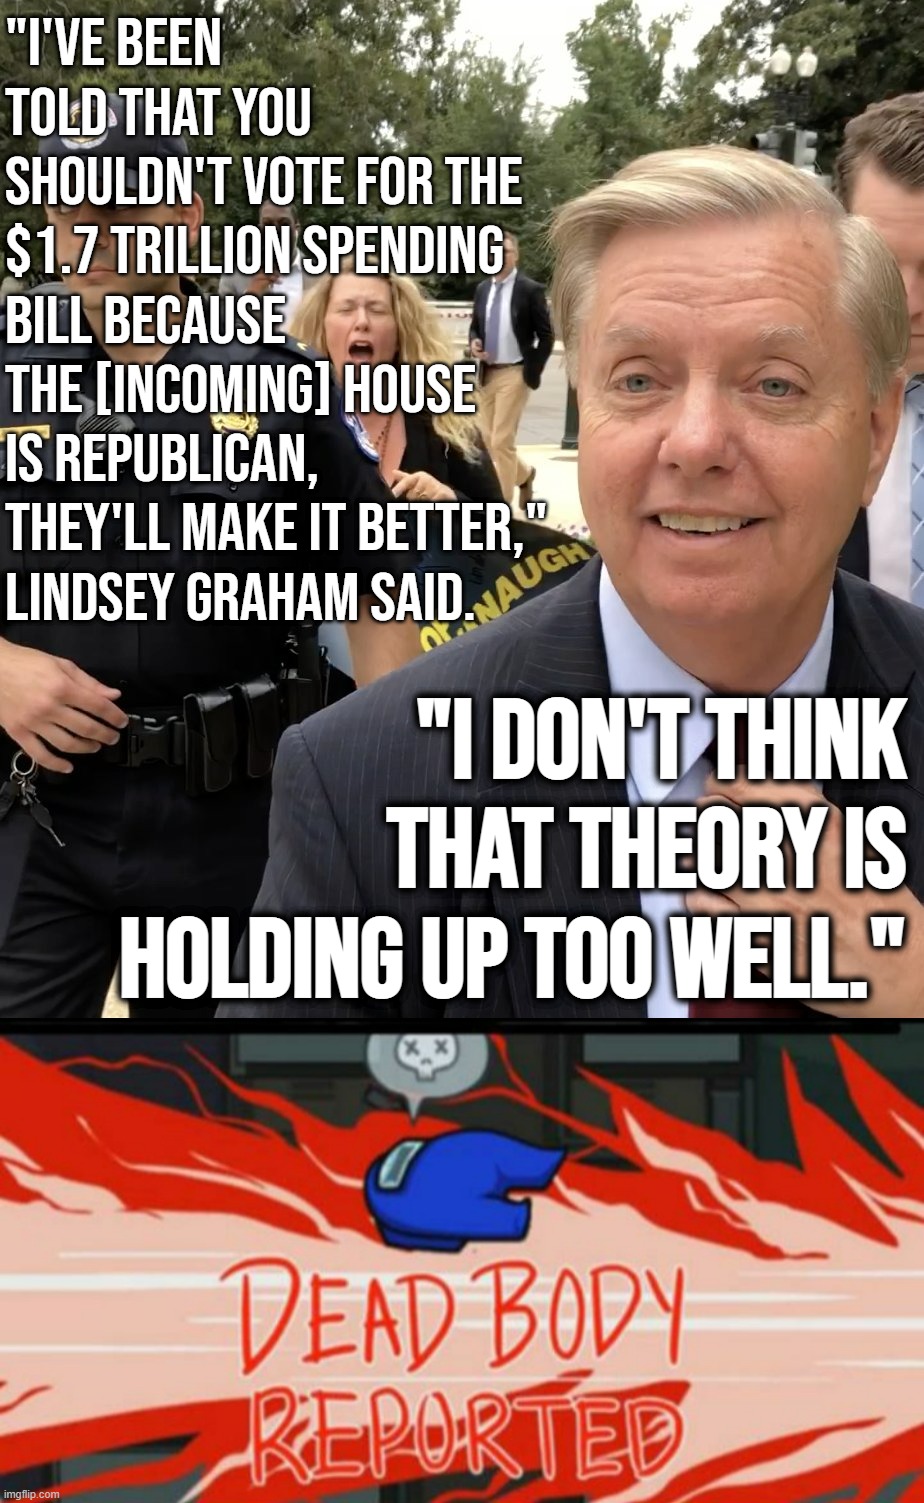 "I'VE BEEN TOLD THAT YOU SHOULDN'T VOTE FOR THE $1.7 TRILLION SPENDING BILL BECAUSE THE [INCOMING] HOUSE IS REPUBLICAN, THEY'LL MAKE IT BETTER," LINDSEY GRAHAM SAID. "I DON'T THINK THAT THEORY IS HOLDING UP TOO WELL." | image tagged in lindsey graham thug life,dead body reported | made w/ Imgflip meme maker